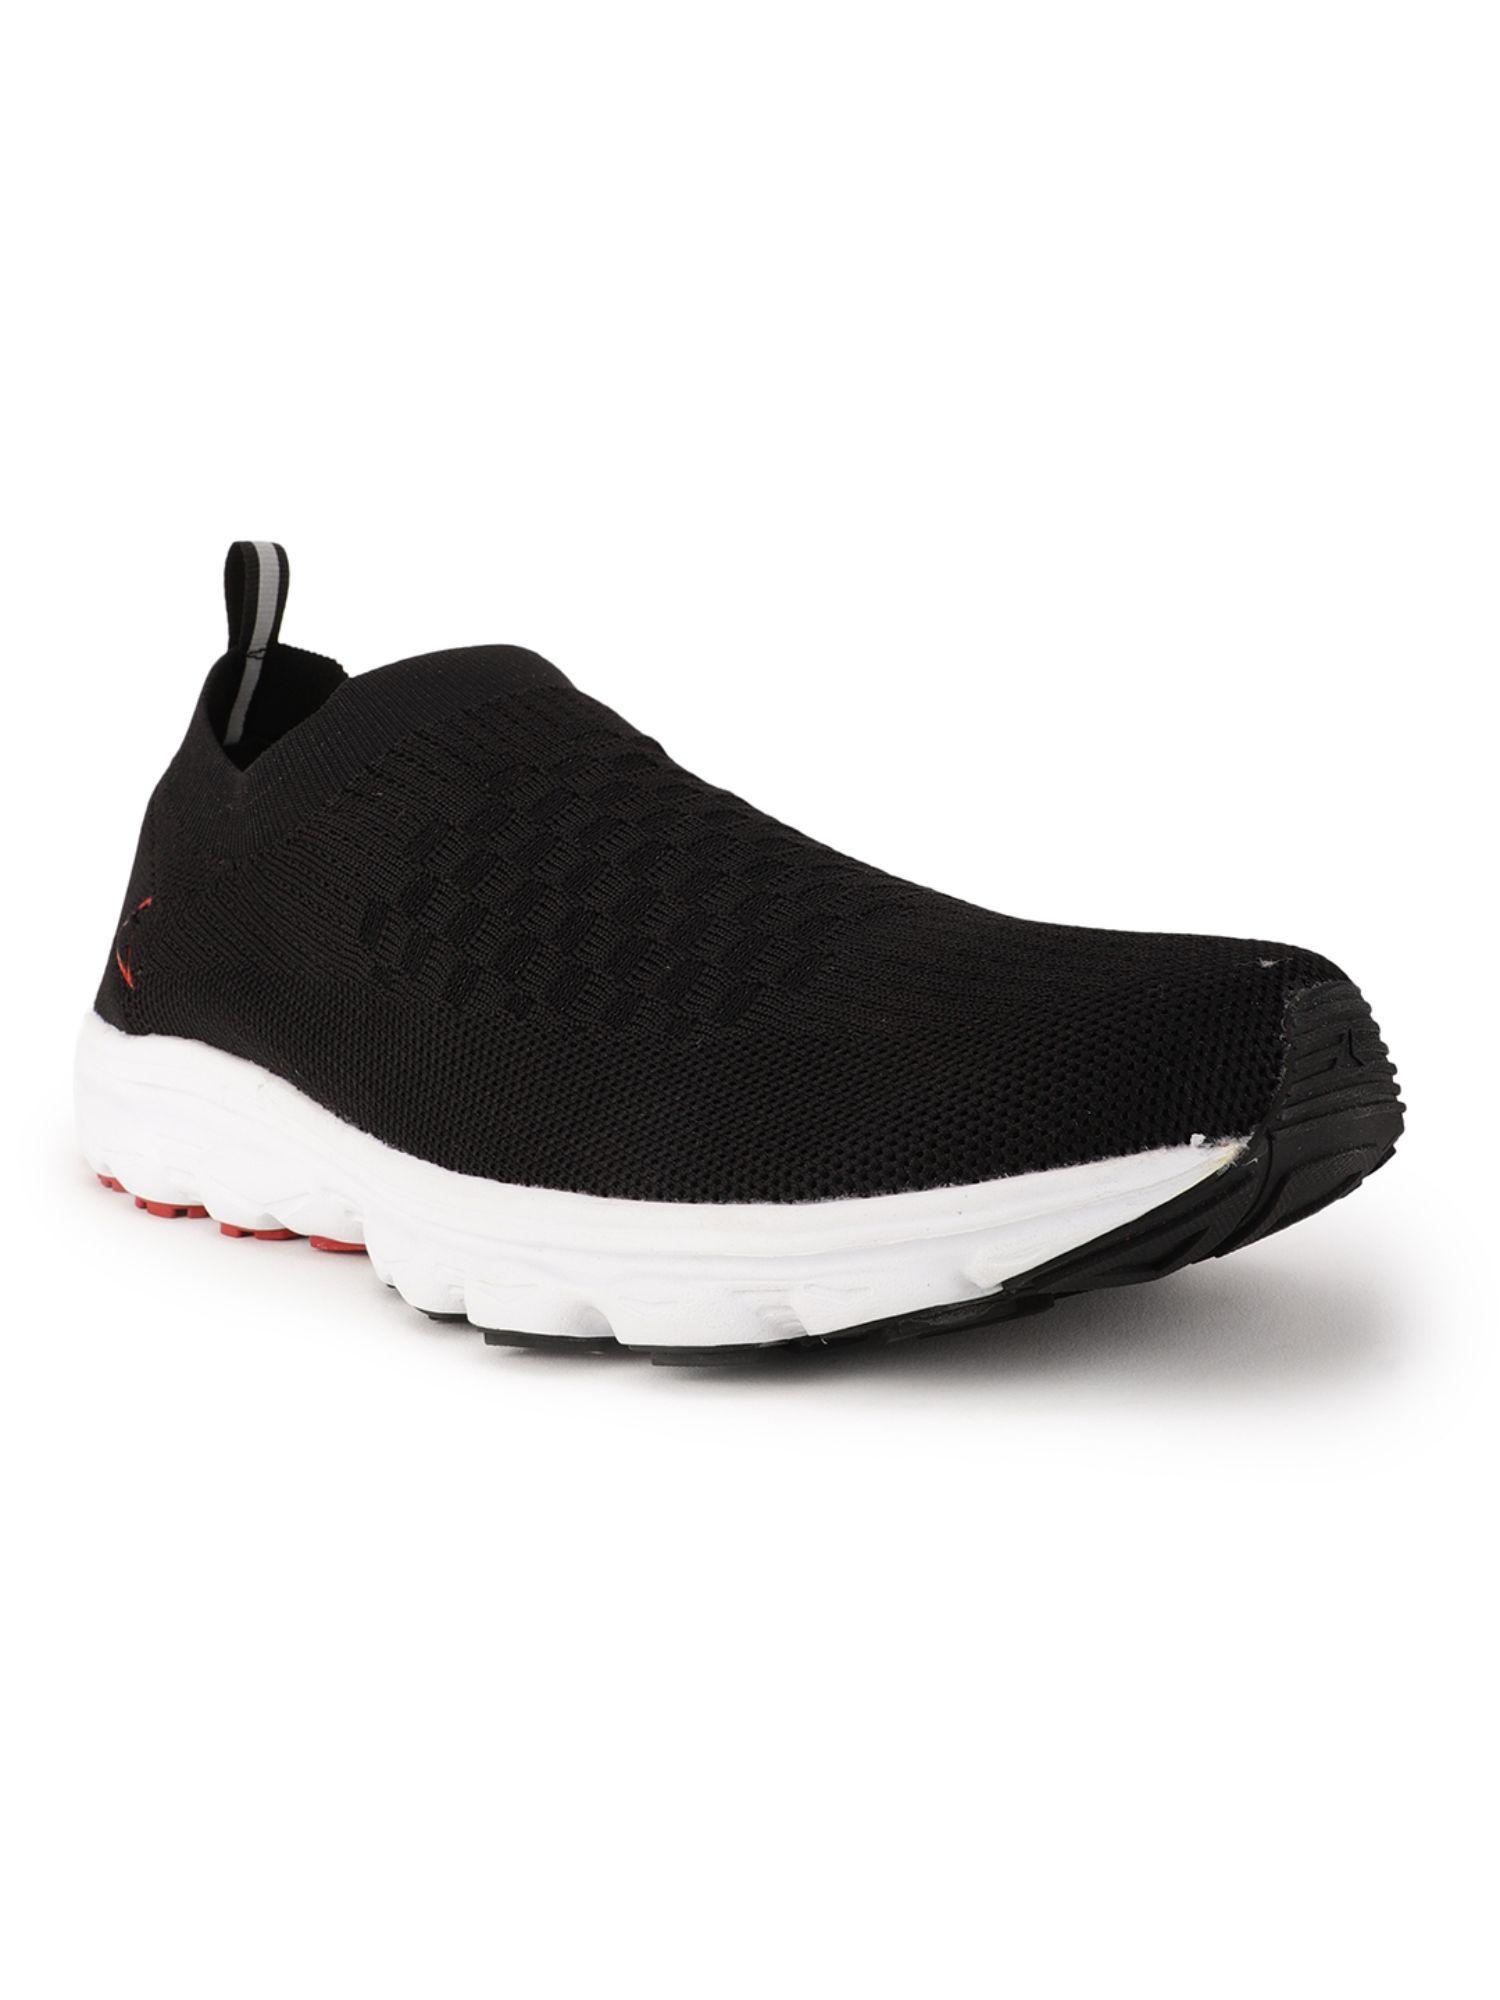 Woven Black Running Shoes